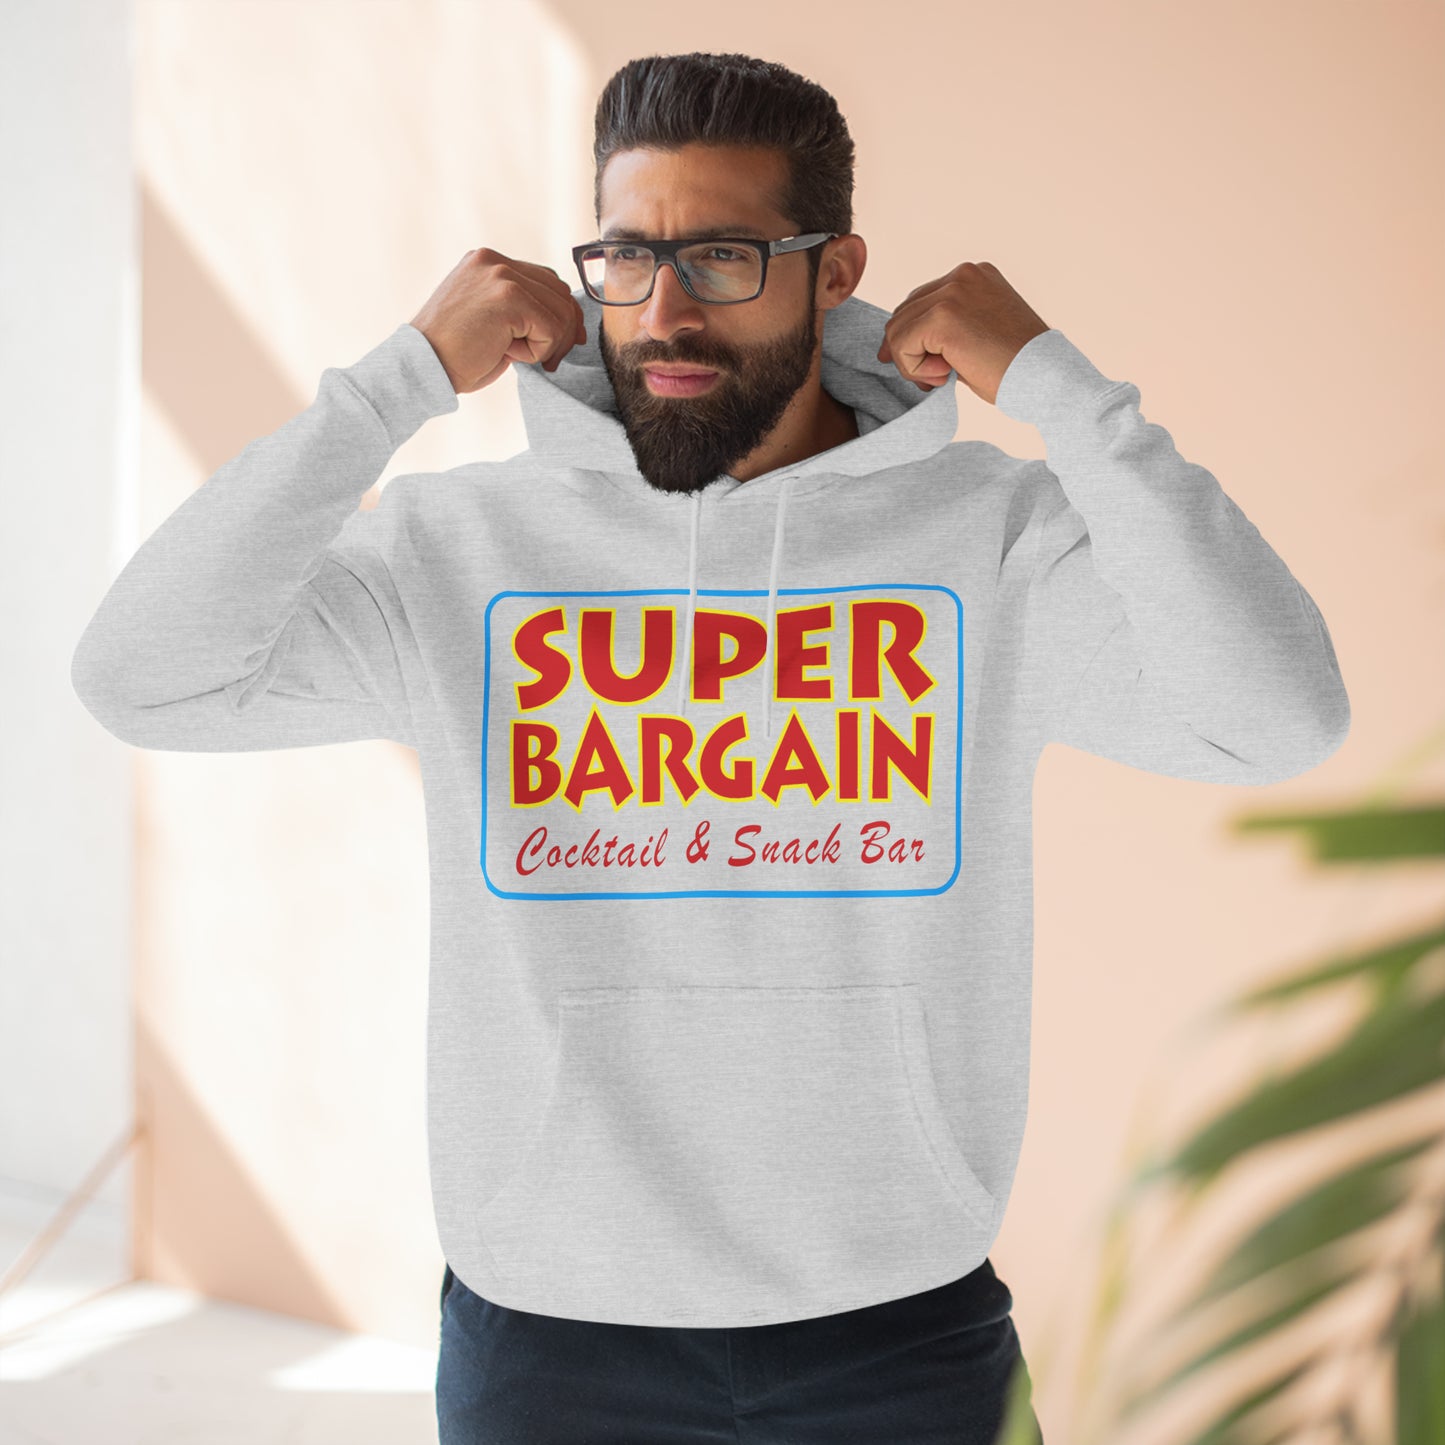 A bearded man wearing glasses adjusts the hood of his gray Printify Unisex Premium Pullover Hoodie, which features a colorful "Super Bargain Cocktail & Snack Bar" logo, popular in Cabbagetown, Toronto, on the front. Light filters softly into the room.